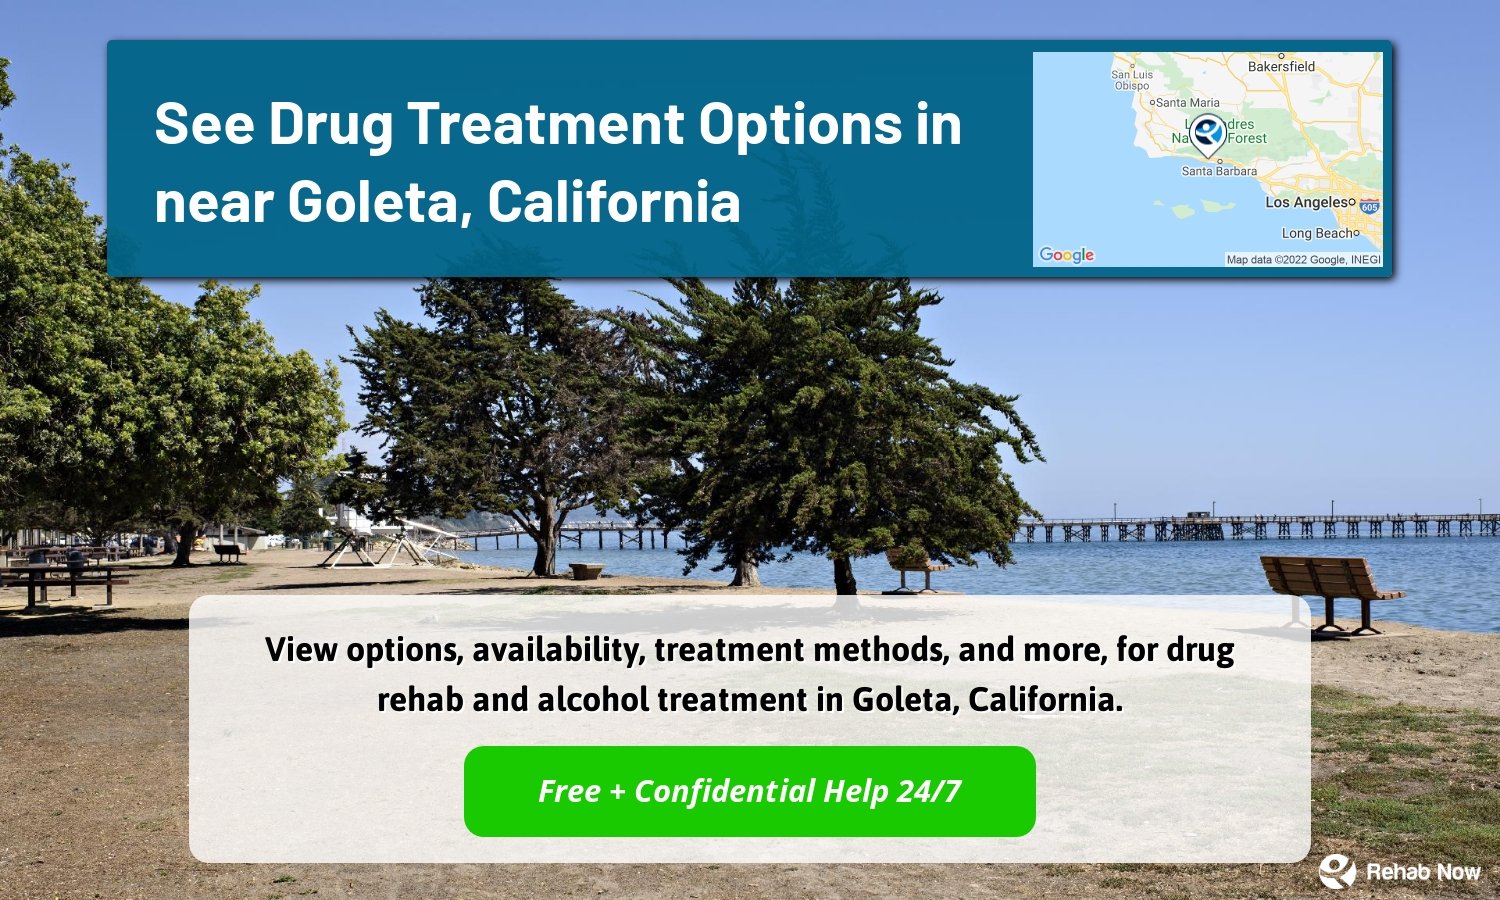 View options, availability, treatment methods, and more, for drug rehab and alcohol treatment in Goleta, California.